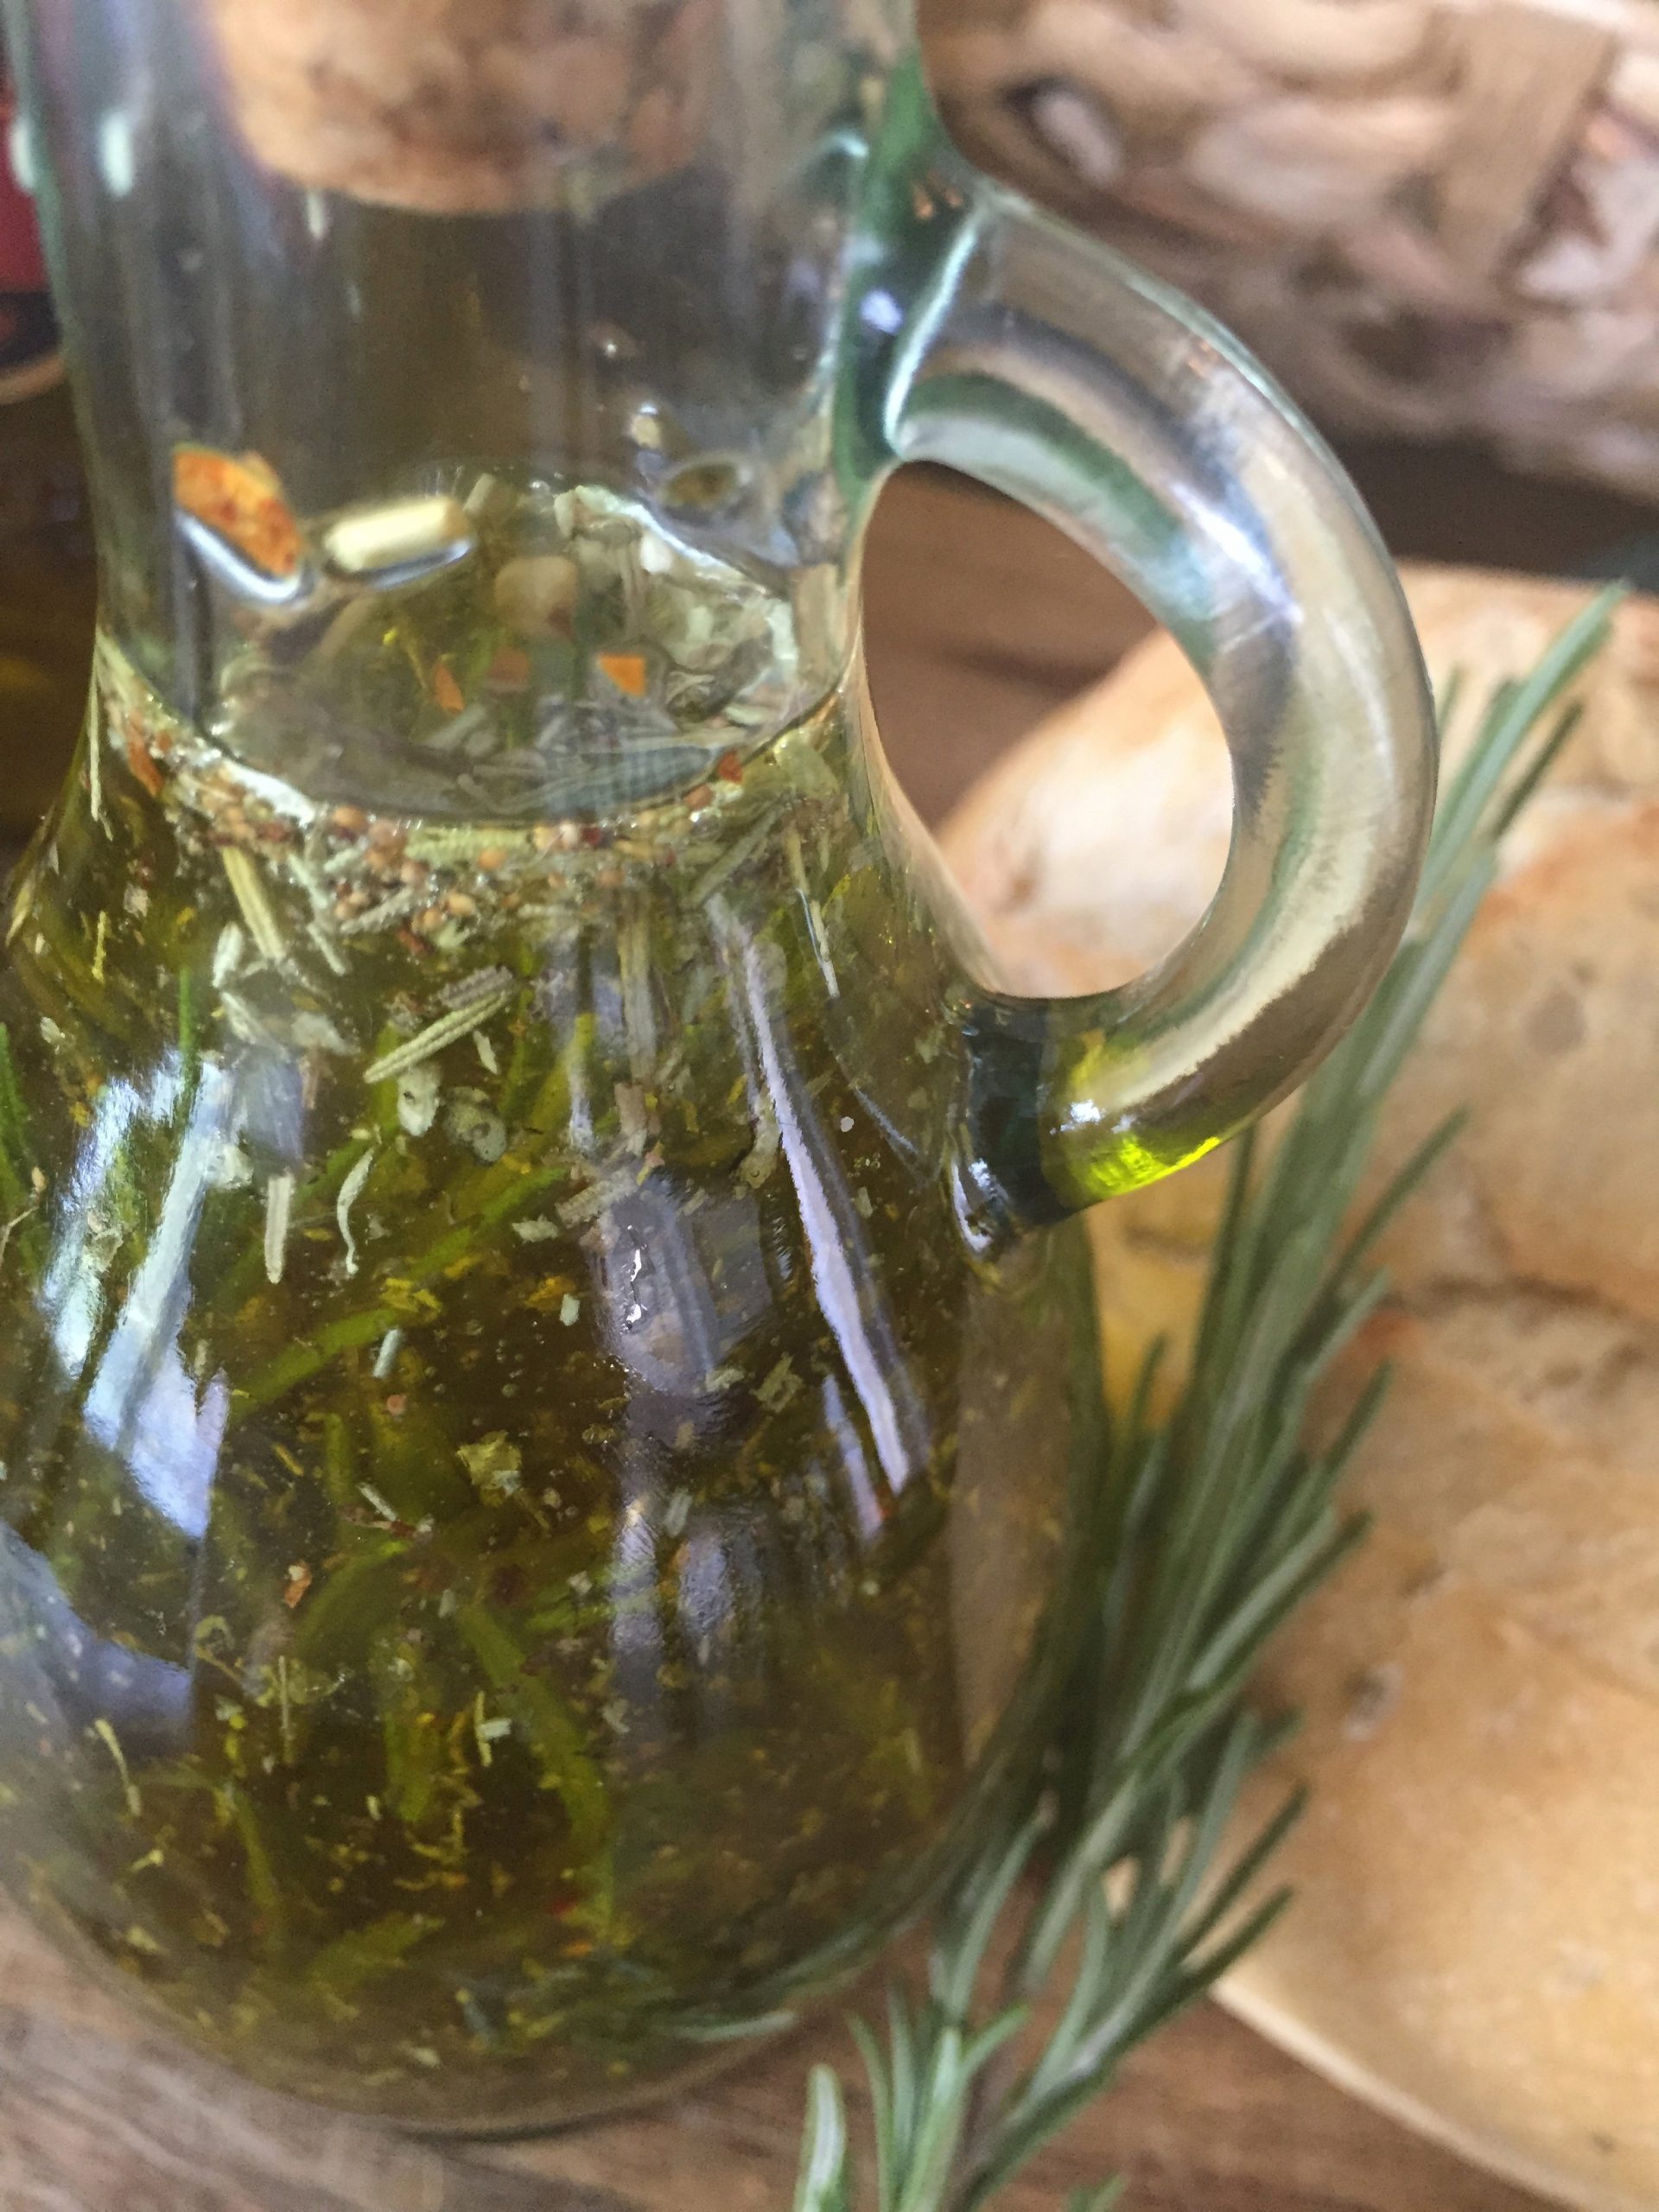 OLIVE “DIPPING” OIL